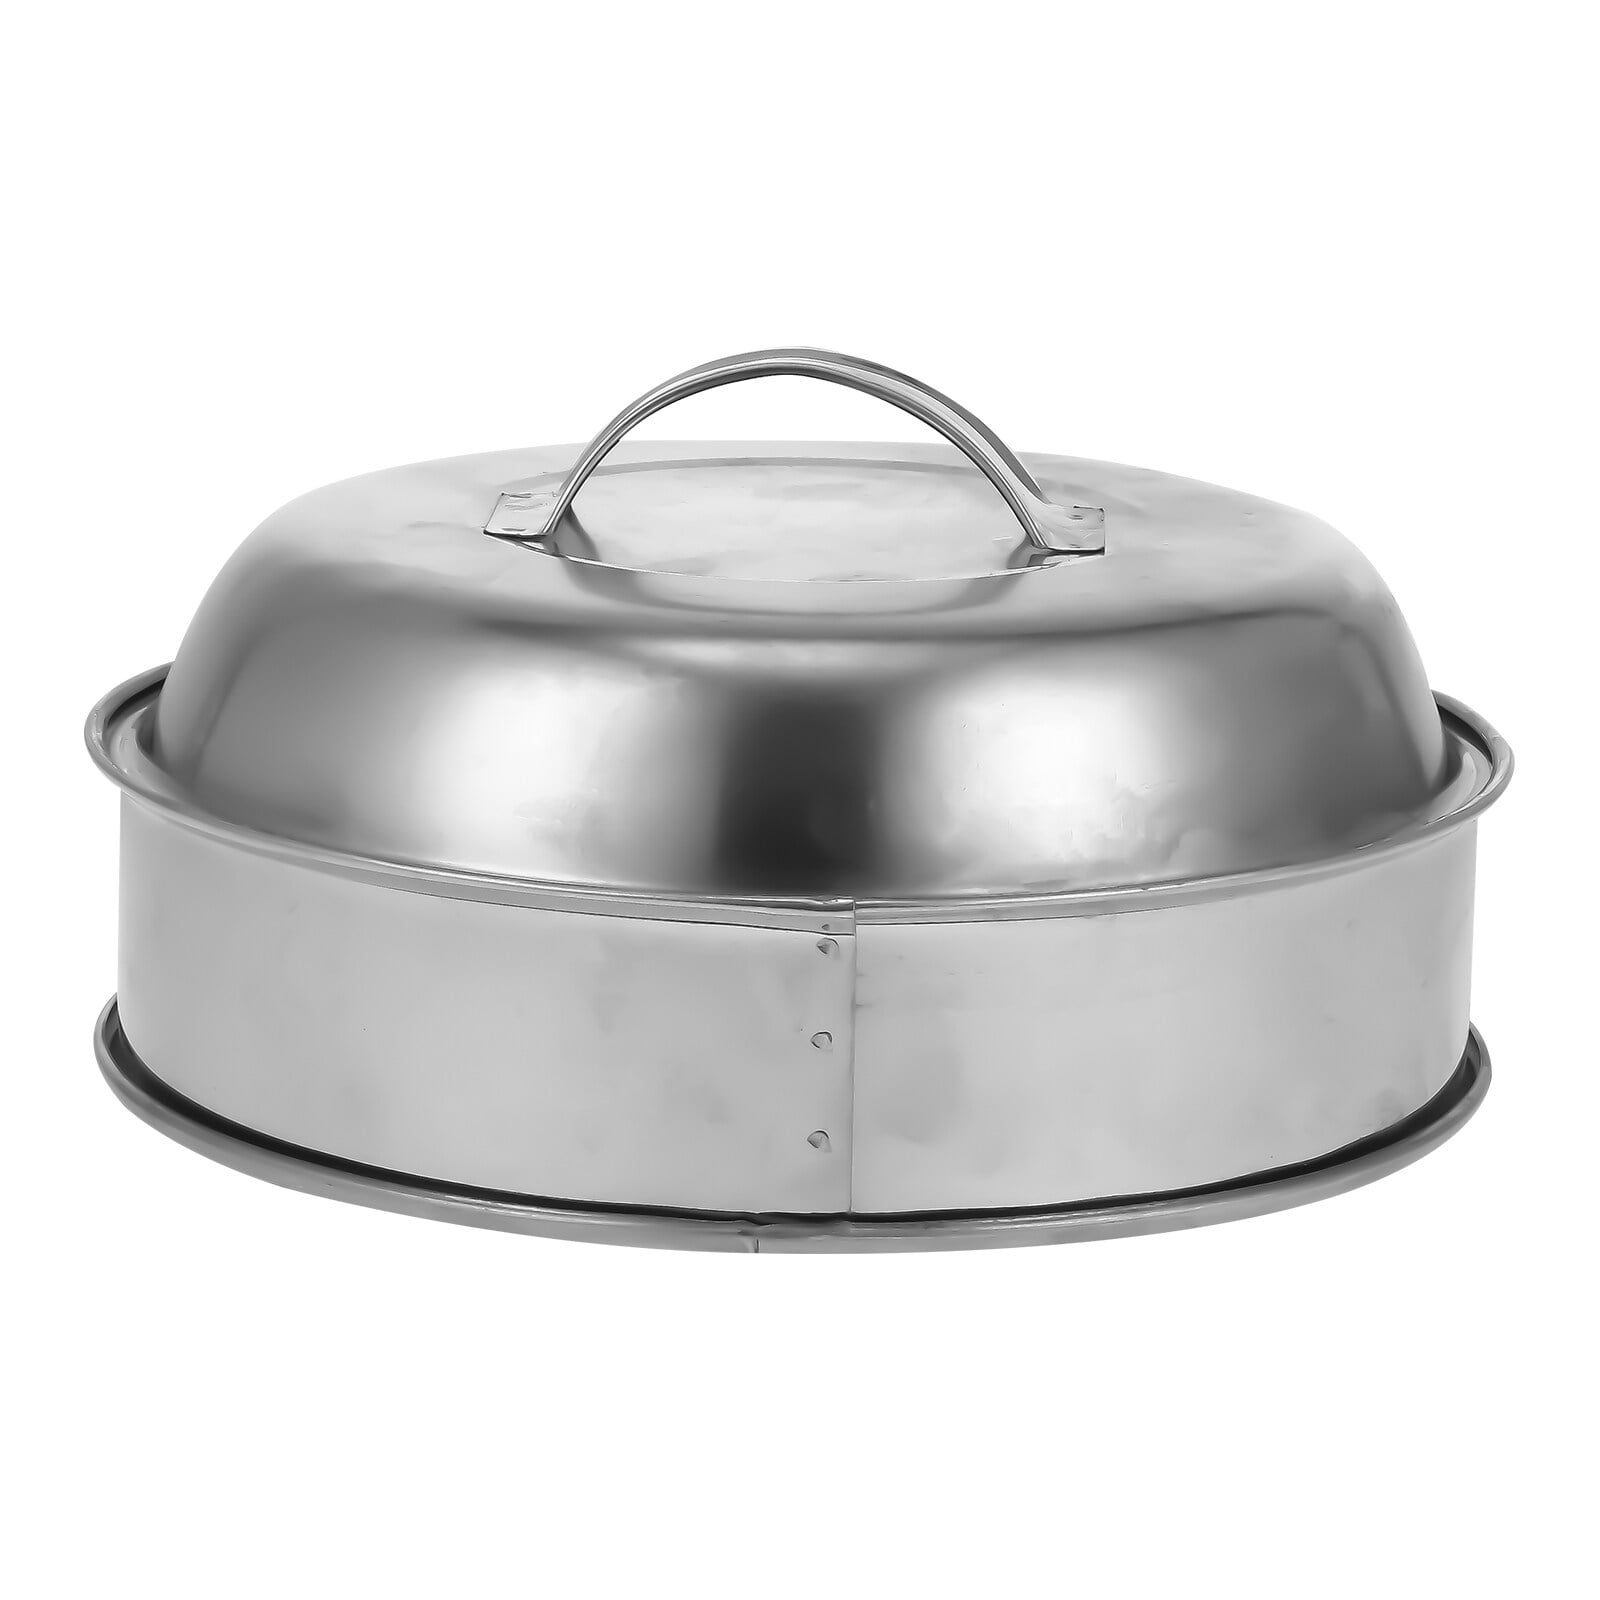 Hemoton Wok Cover Dome Stainless Steel Pot Lid Universal Pan Lid Glass Lid Frying Pan Cover Cookware Lids for Pots Pans Fry Pan Skillet Stainless